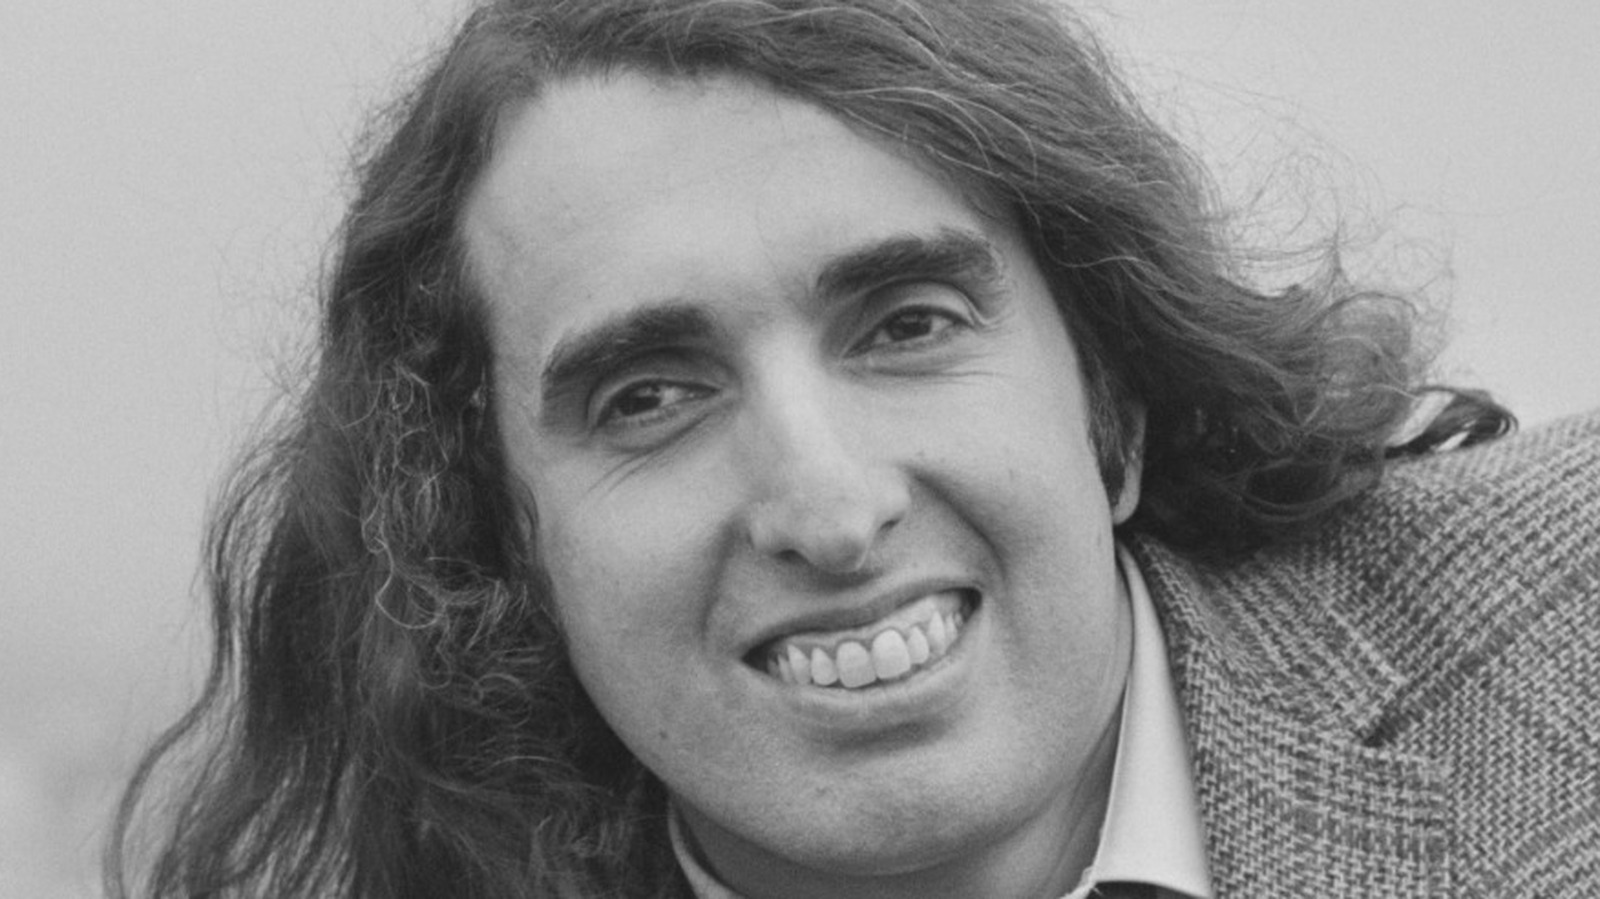 The Touching Tiny Tim Reportedly Buried With